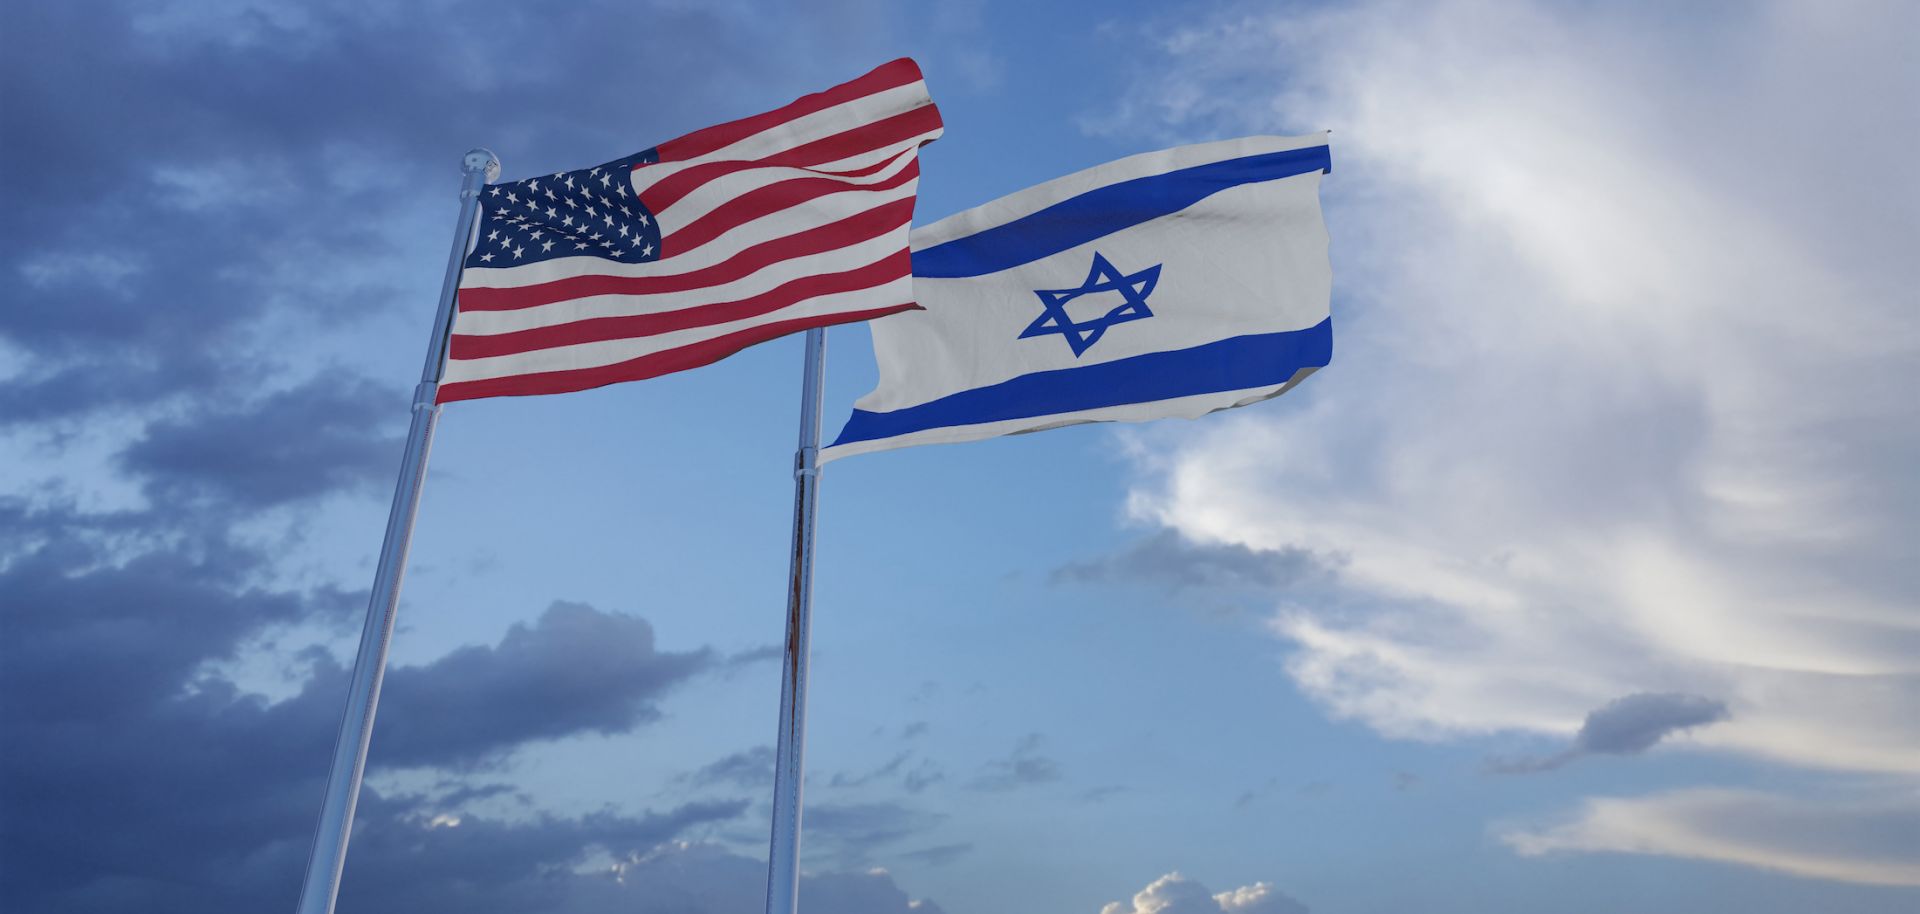 A photo illustration shows the U.S. and Israeli flags.